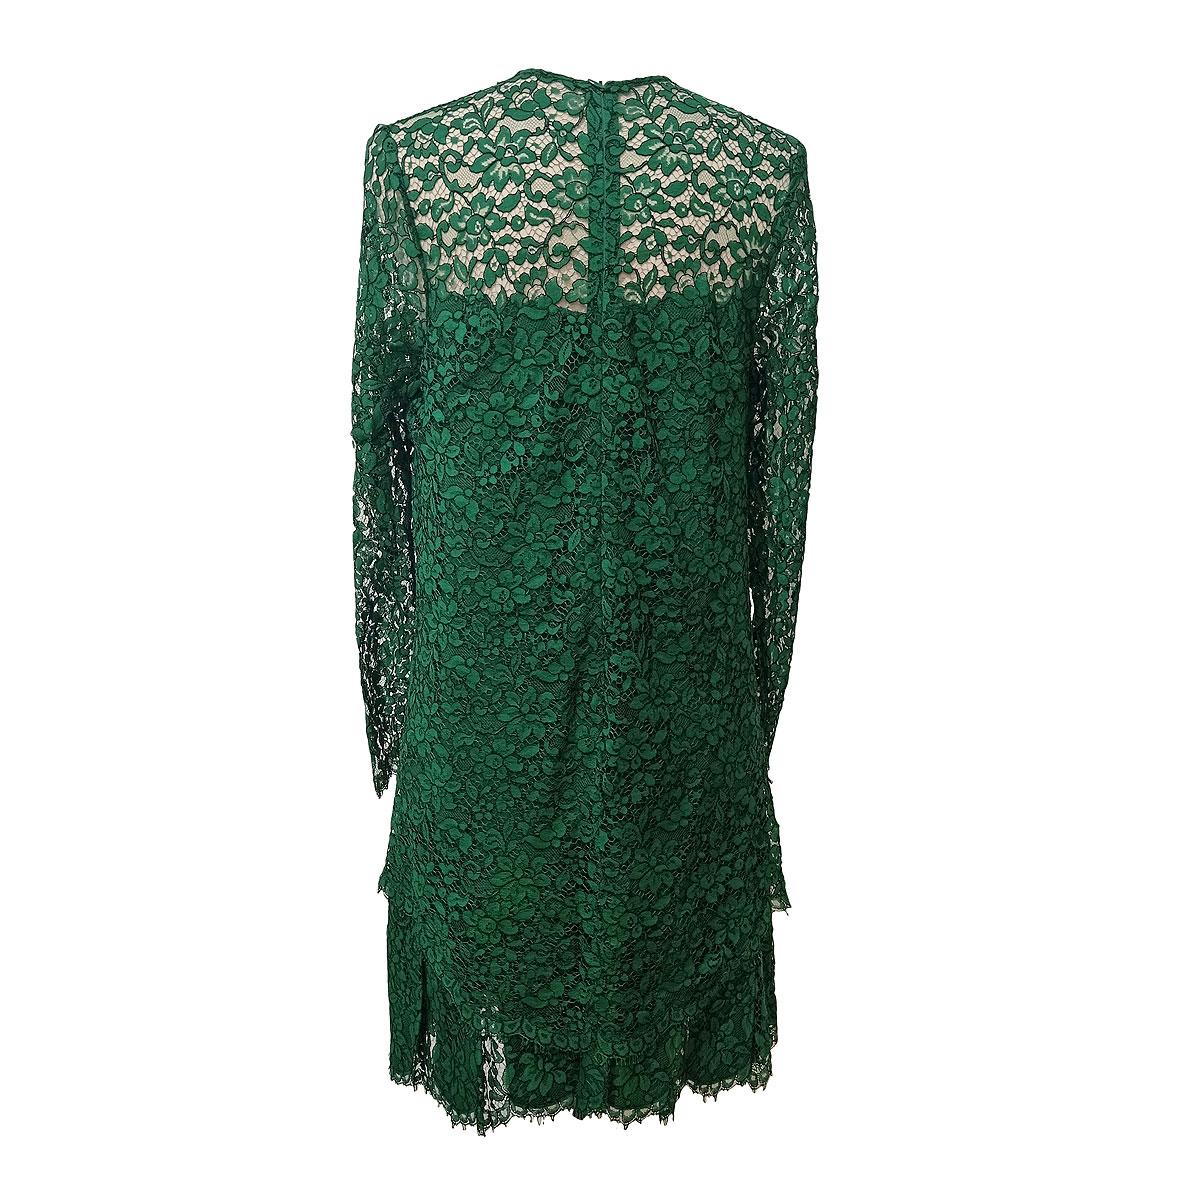 Fantastic dress by Ermanno Scervino 
Lace dress
Viscose (46%), cotton (39%) and nylon
Silk lining
Green color
Long sleeve
Amazing total construction of fine lace
Shoulder/hem length cm 85 (33,4 inches)
Shoulder cm 36 (14,1 inches)
Worldwide express